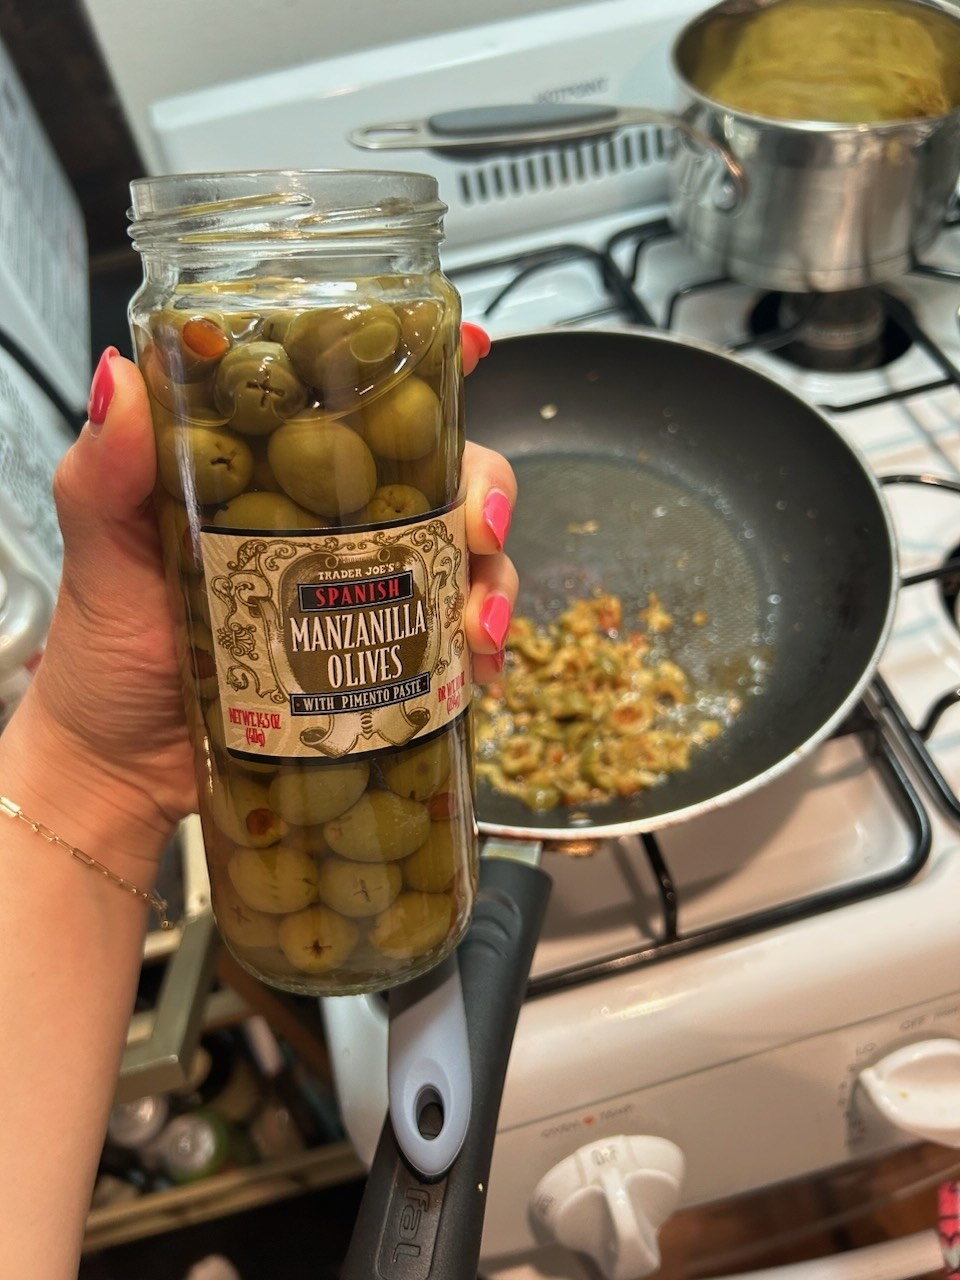 The writer holding a jar of olives